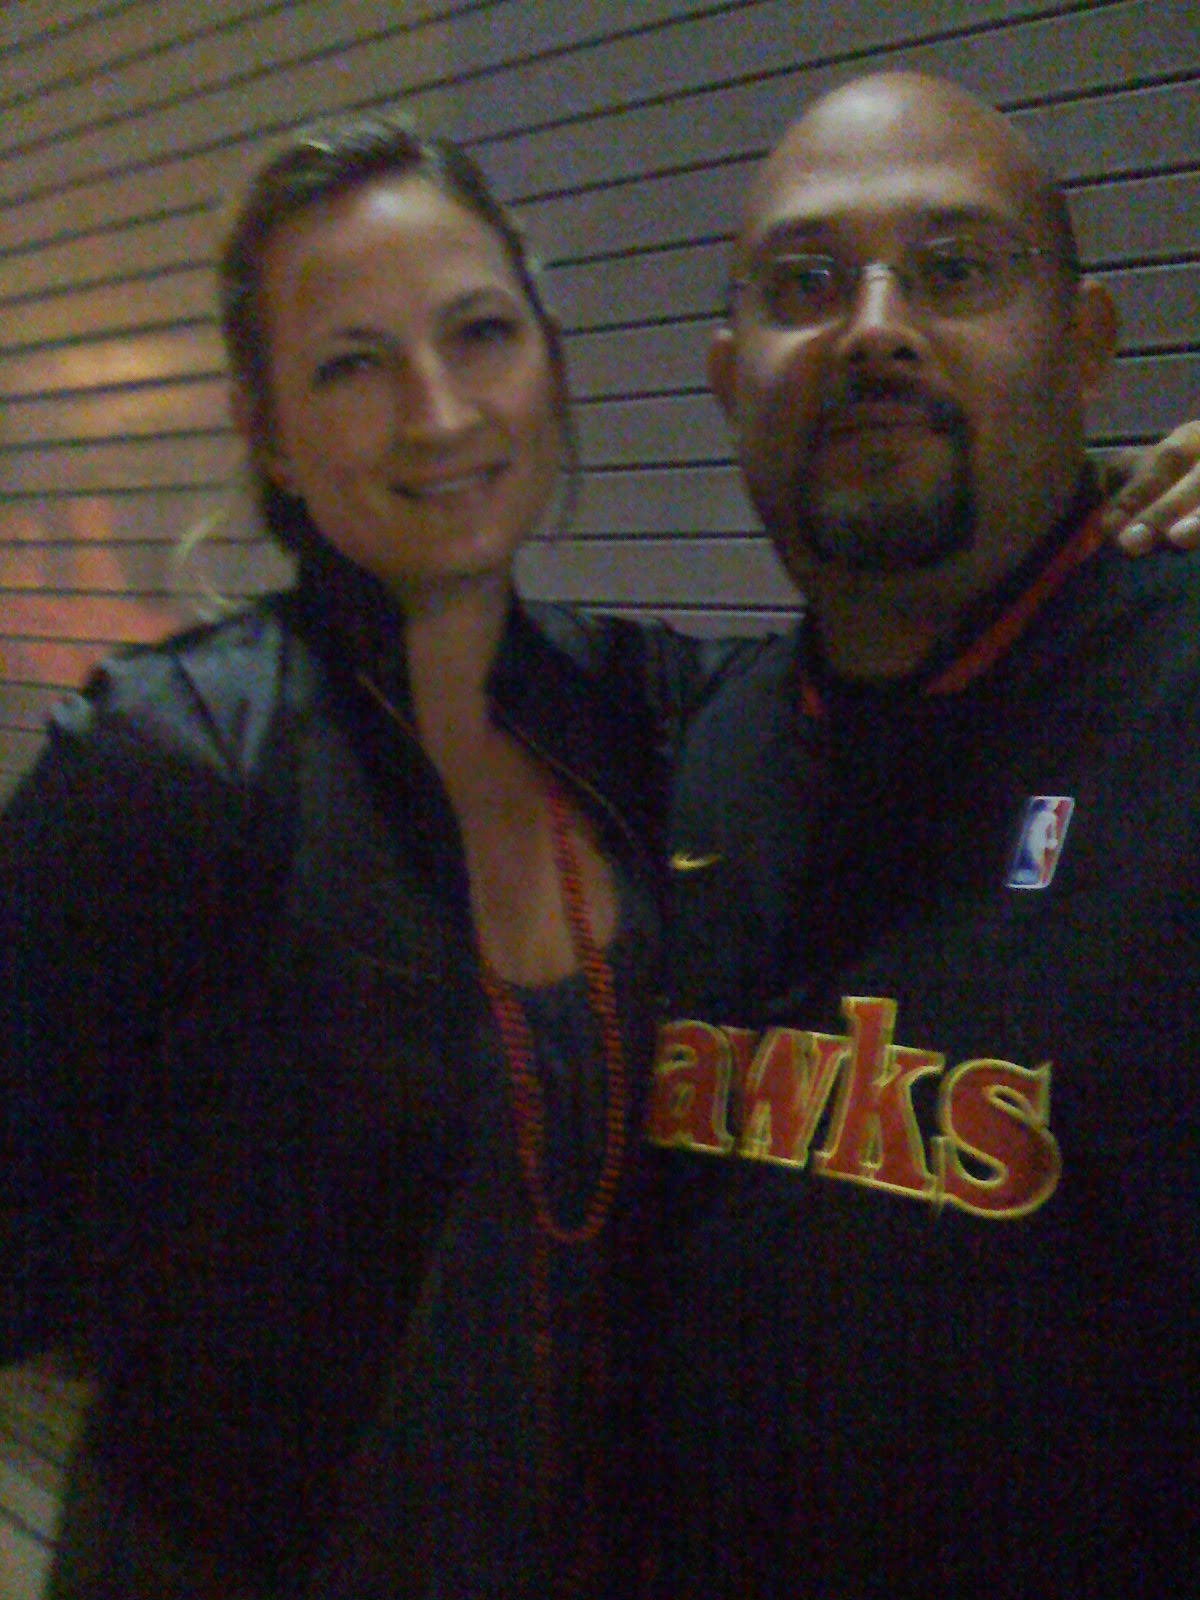 Me and Zoe Bell